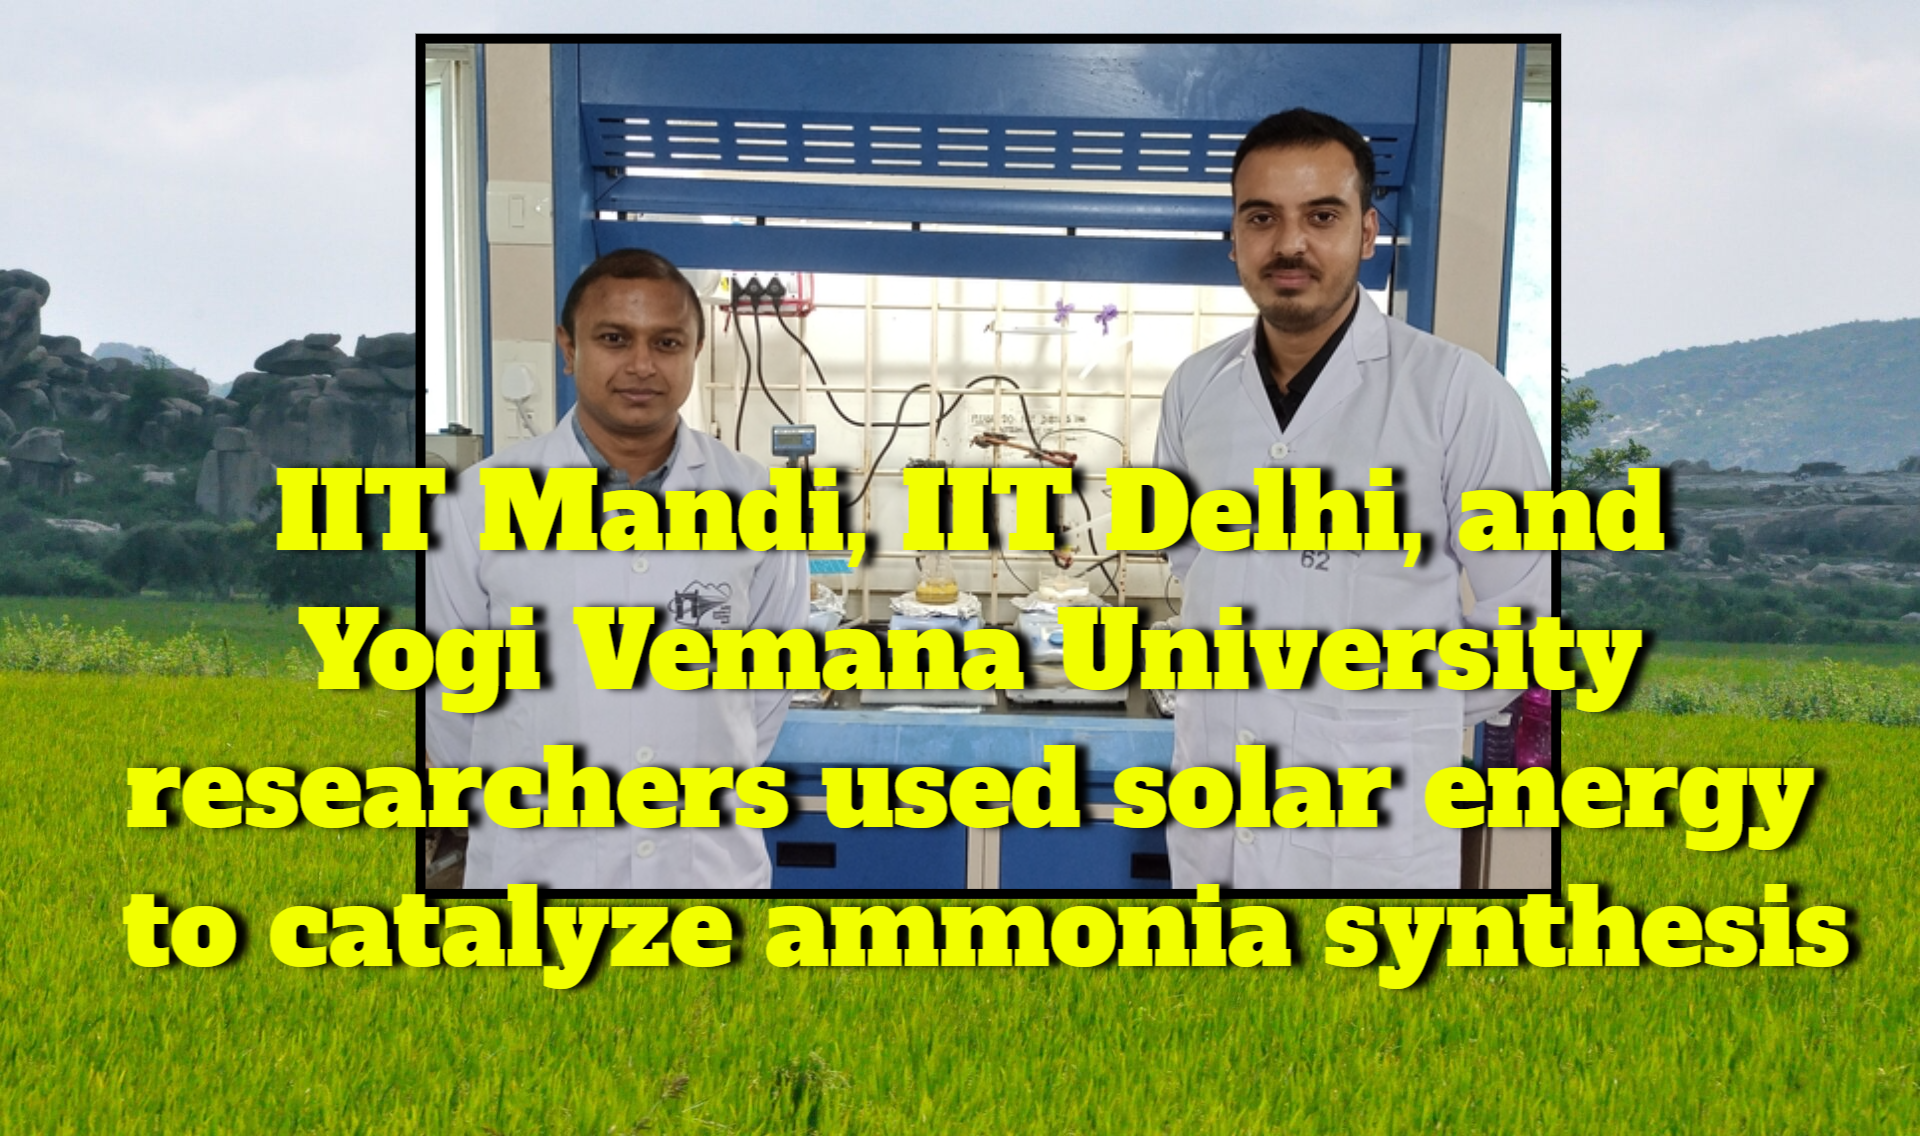 IIT Researchers Develop Catalytic Structures to Produce Ammonia From Solar Energy